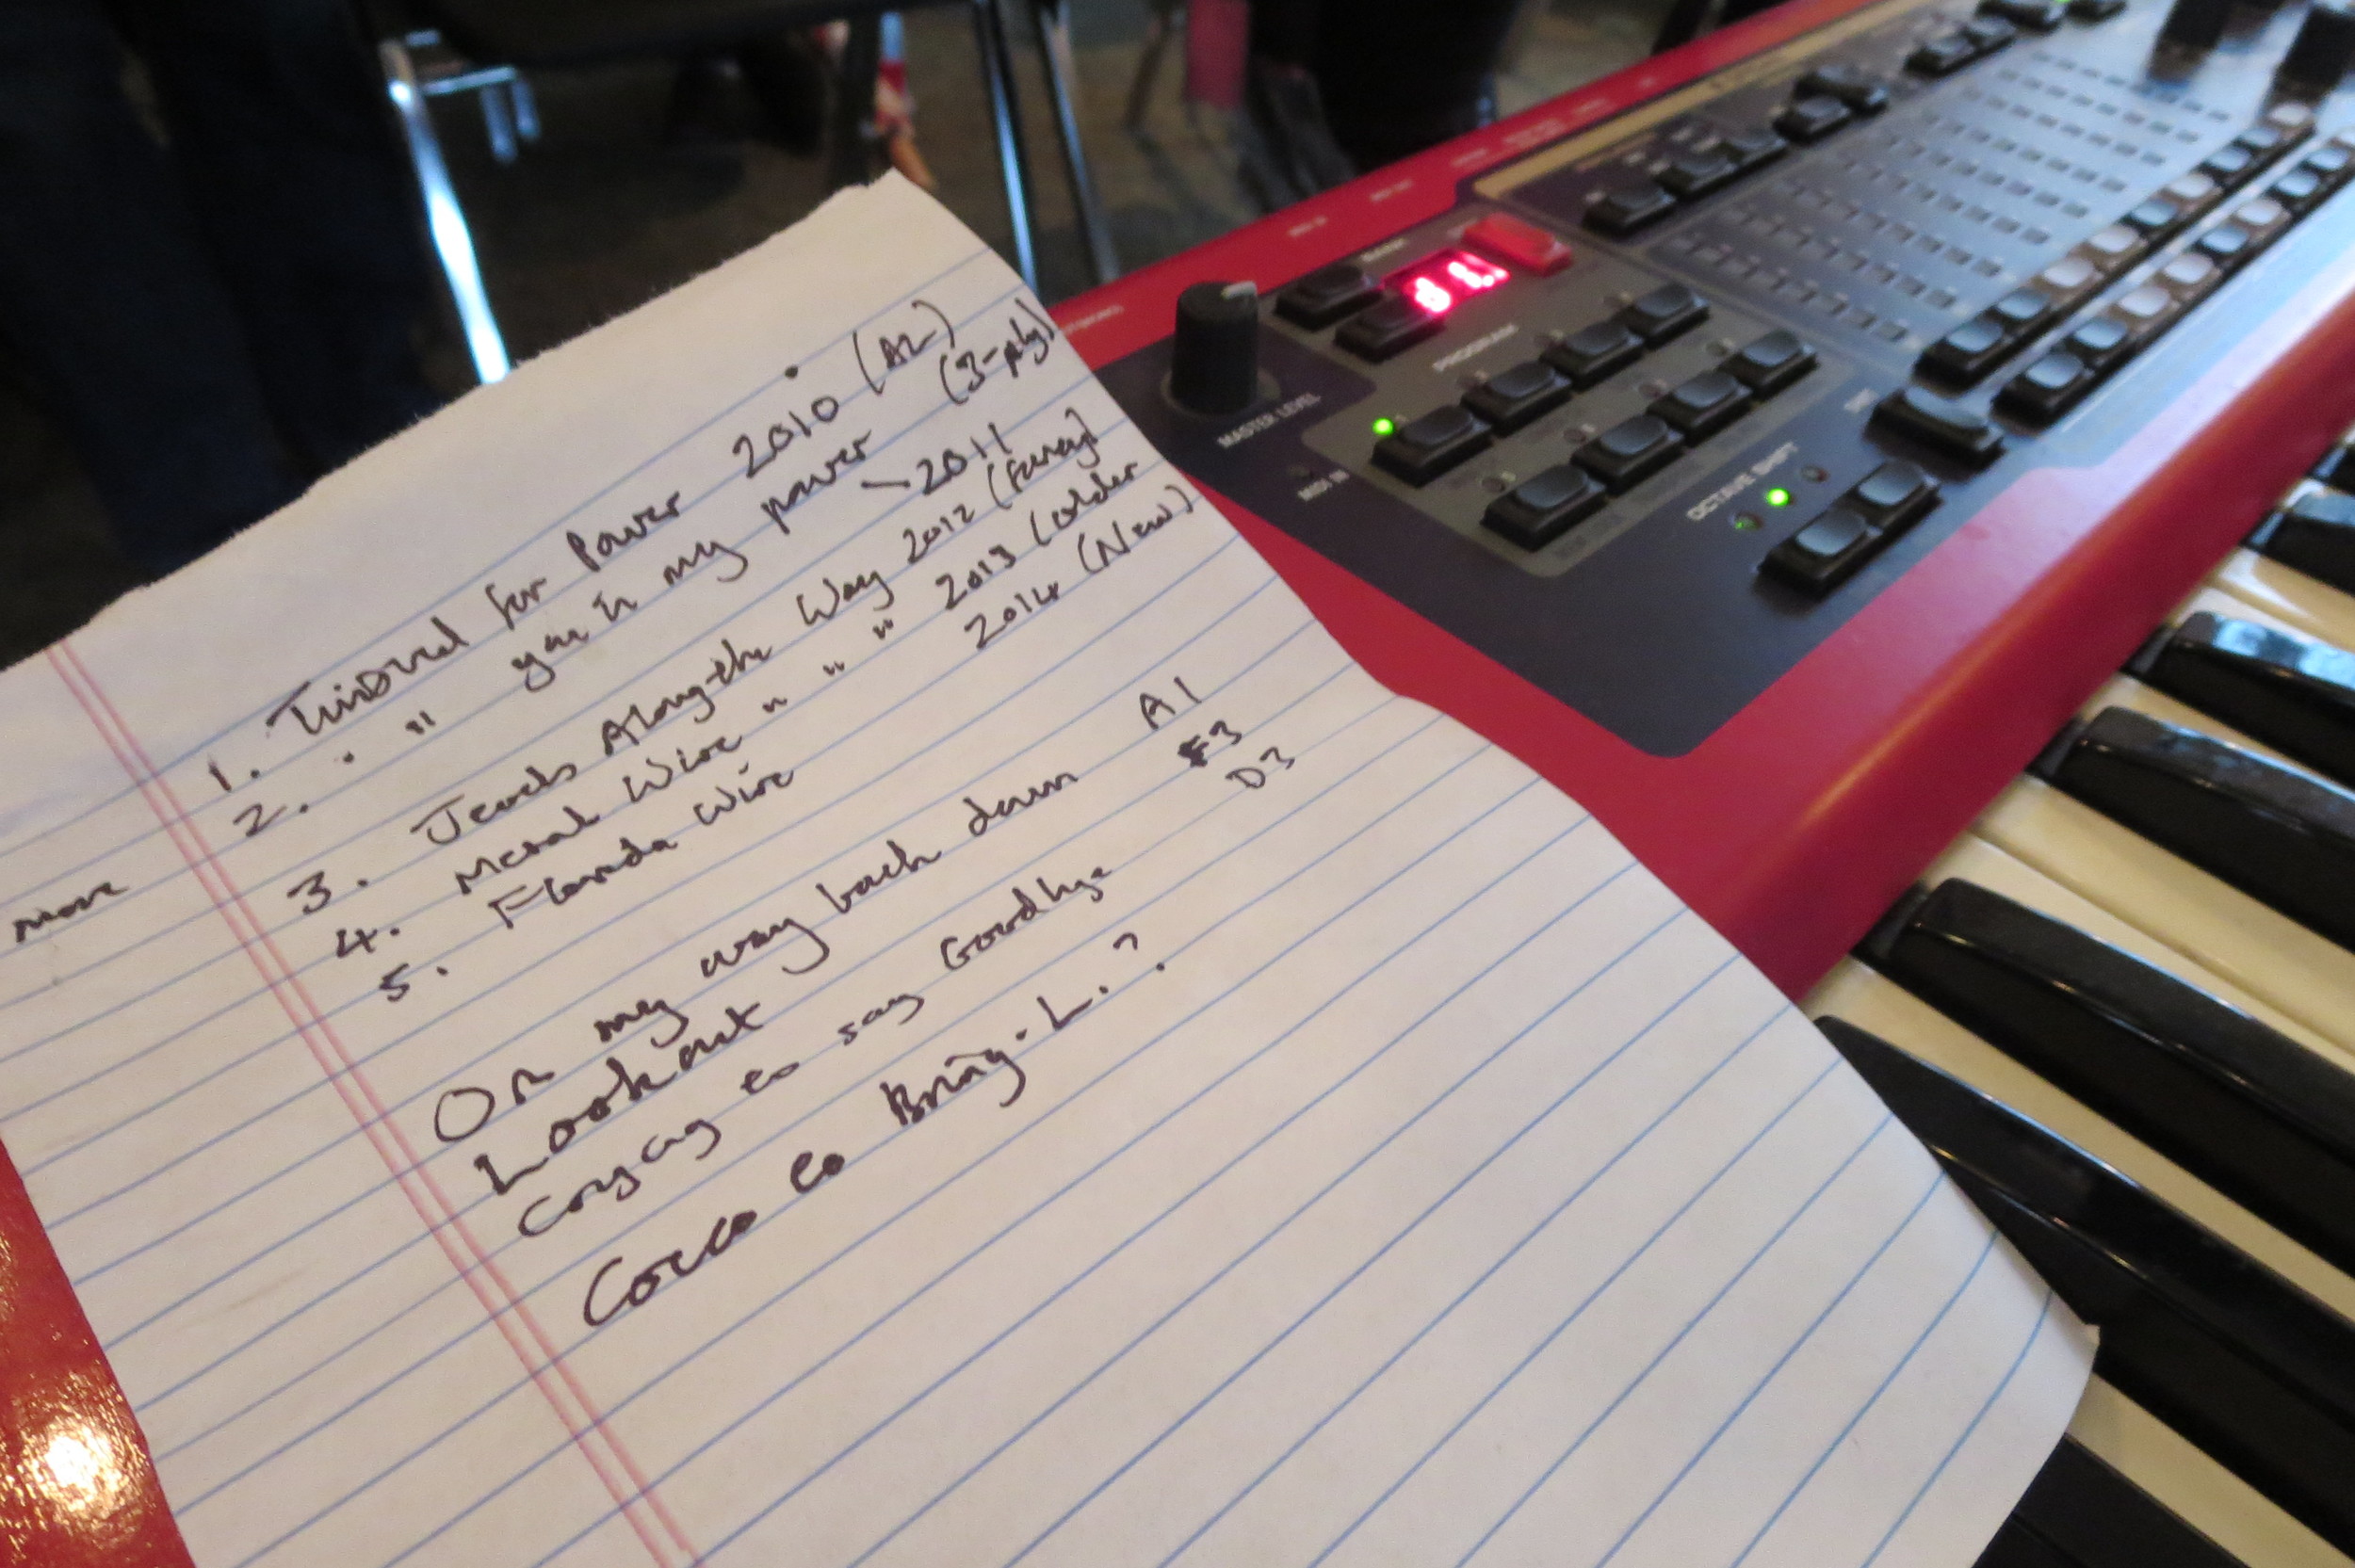 Lonnie Holley's show notes for the launch event.